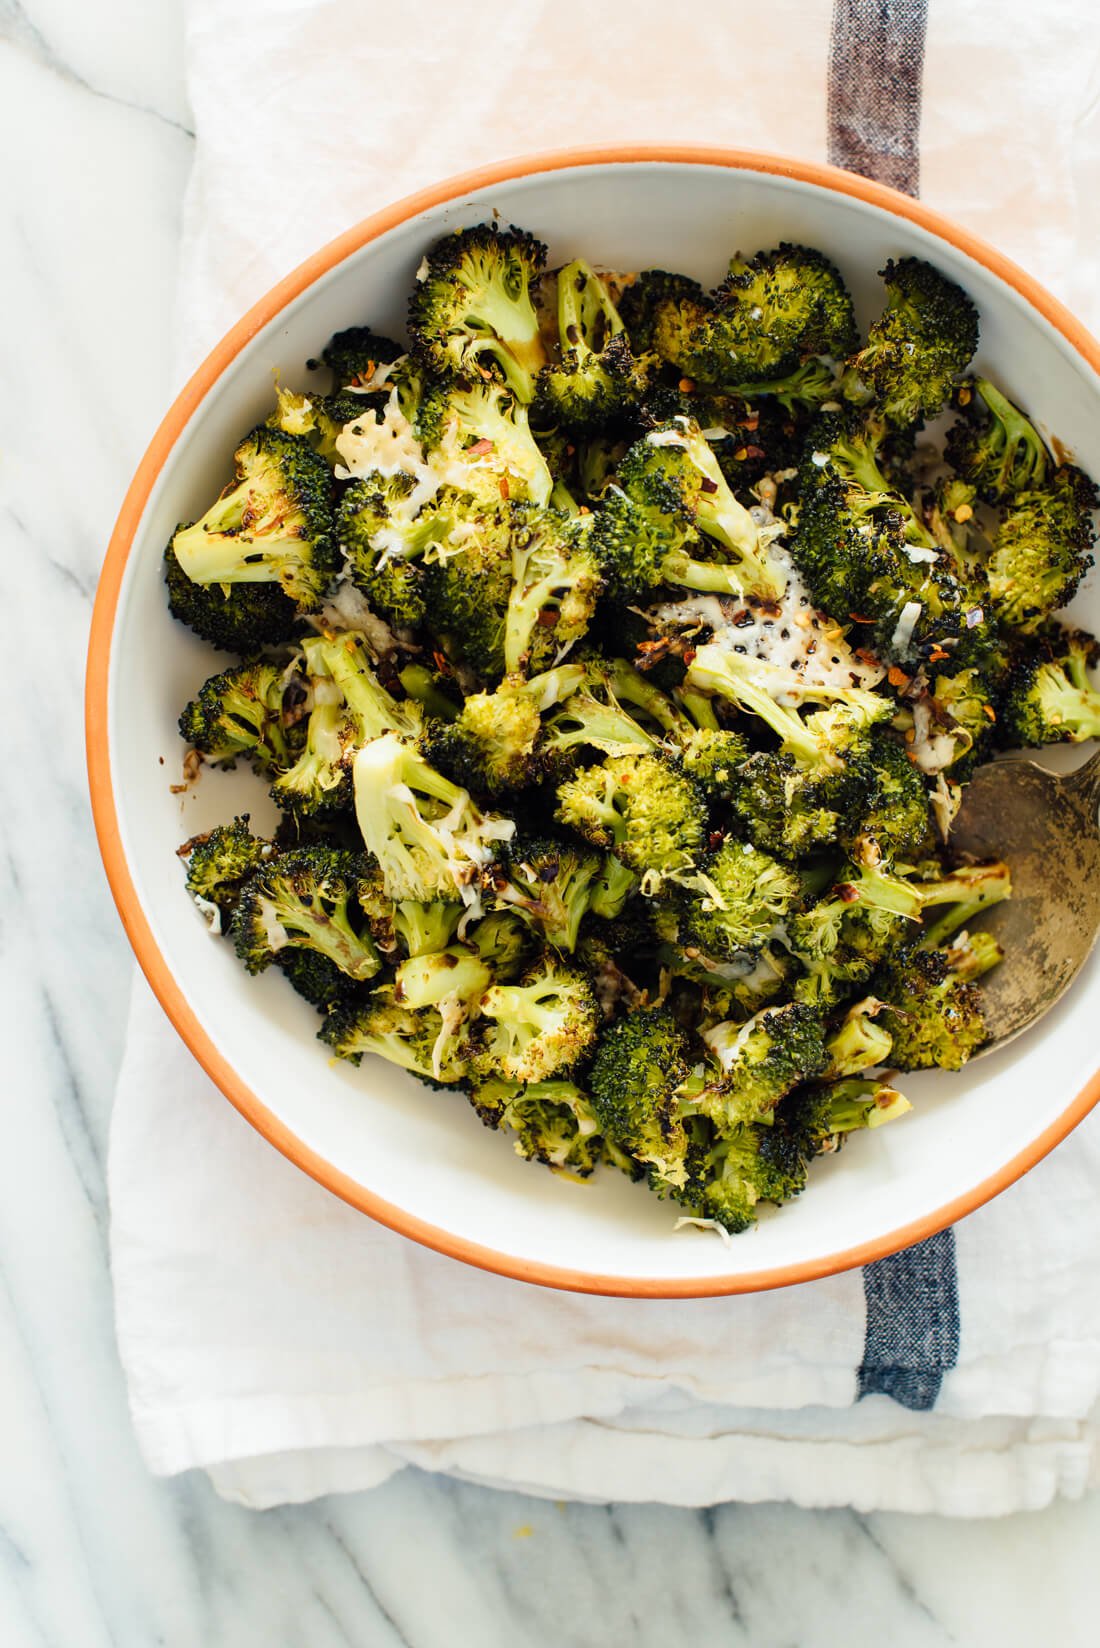 roasted broccoli recipe with Parmesan cheese and balsamic vinegar